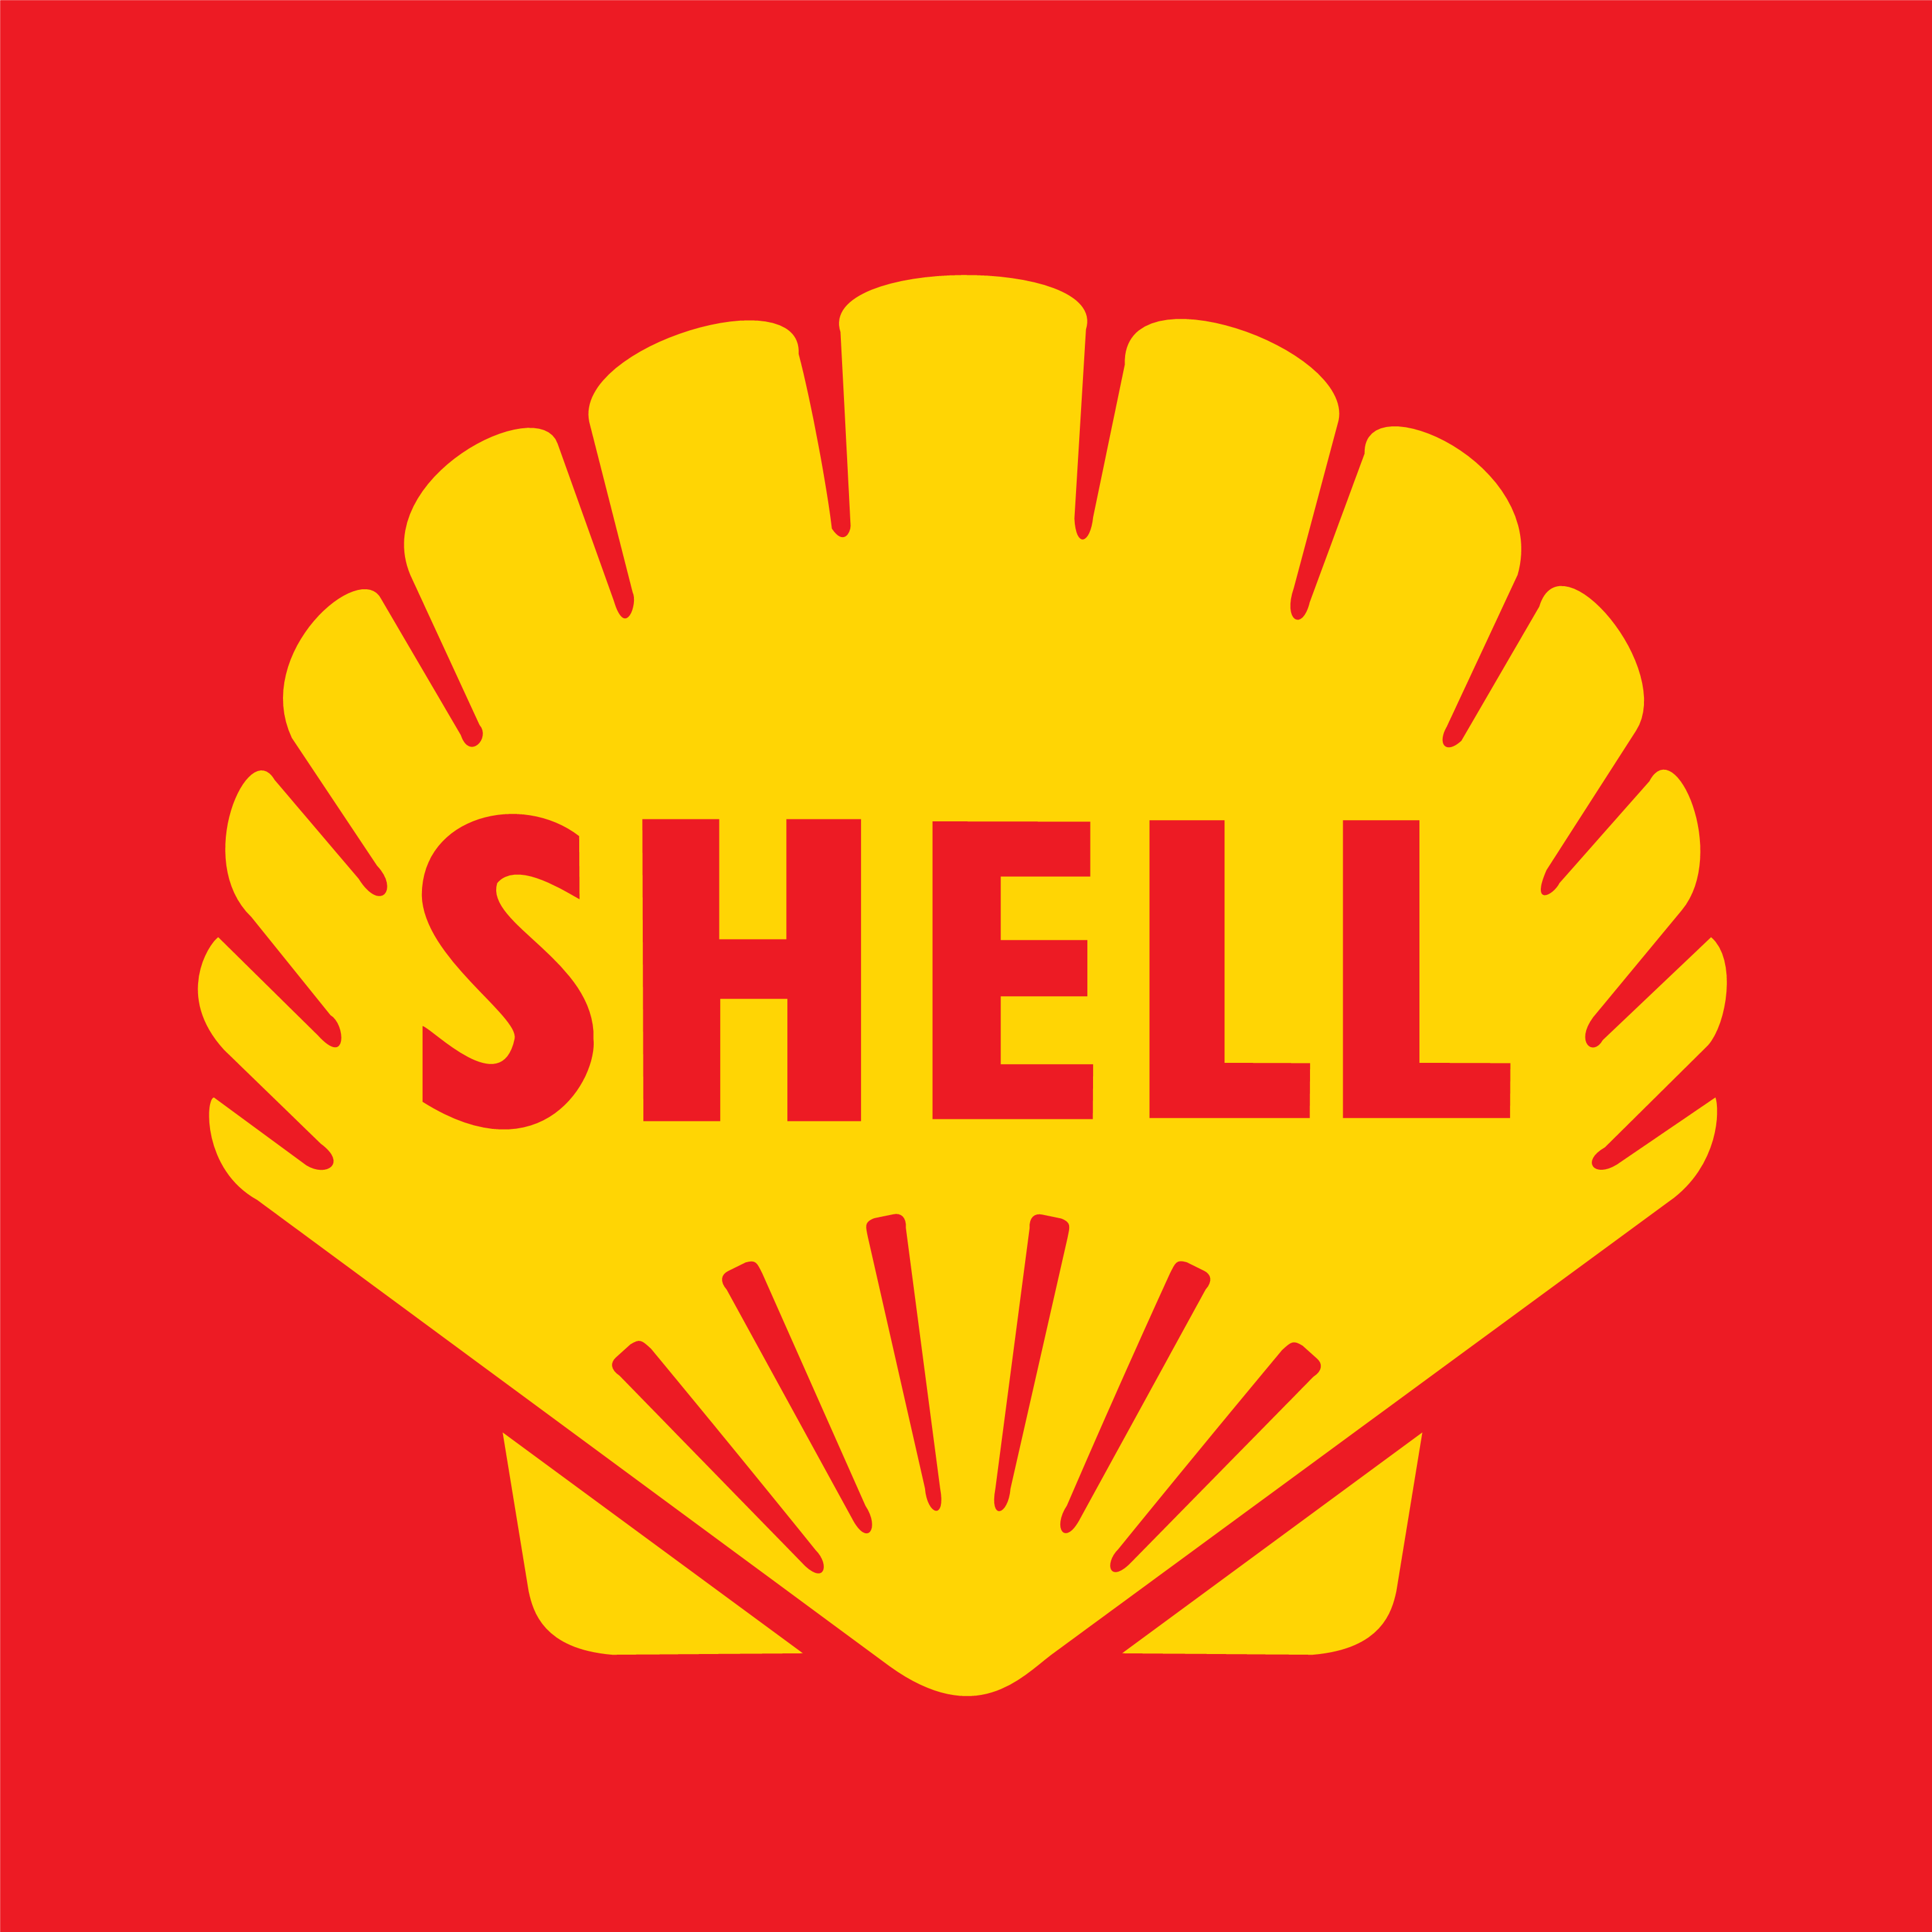 Red and Yellow Seashell Logo - Shell: The evolution of a logo